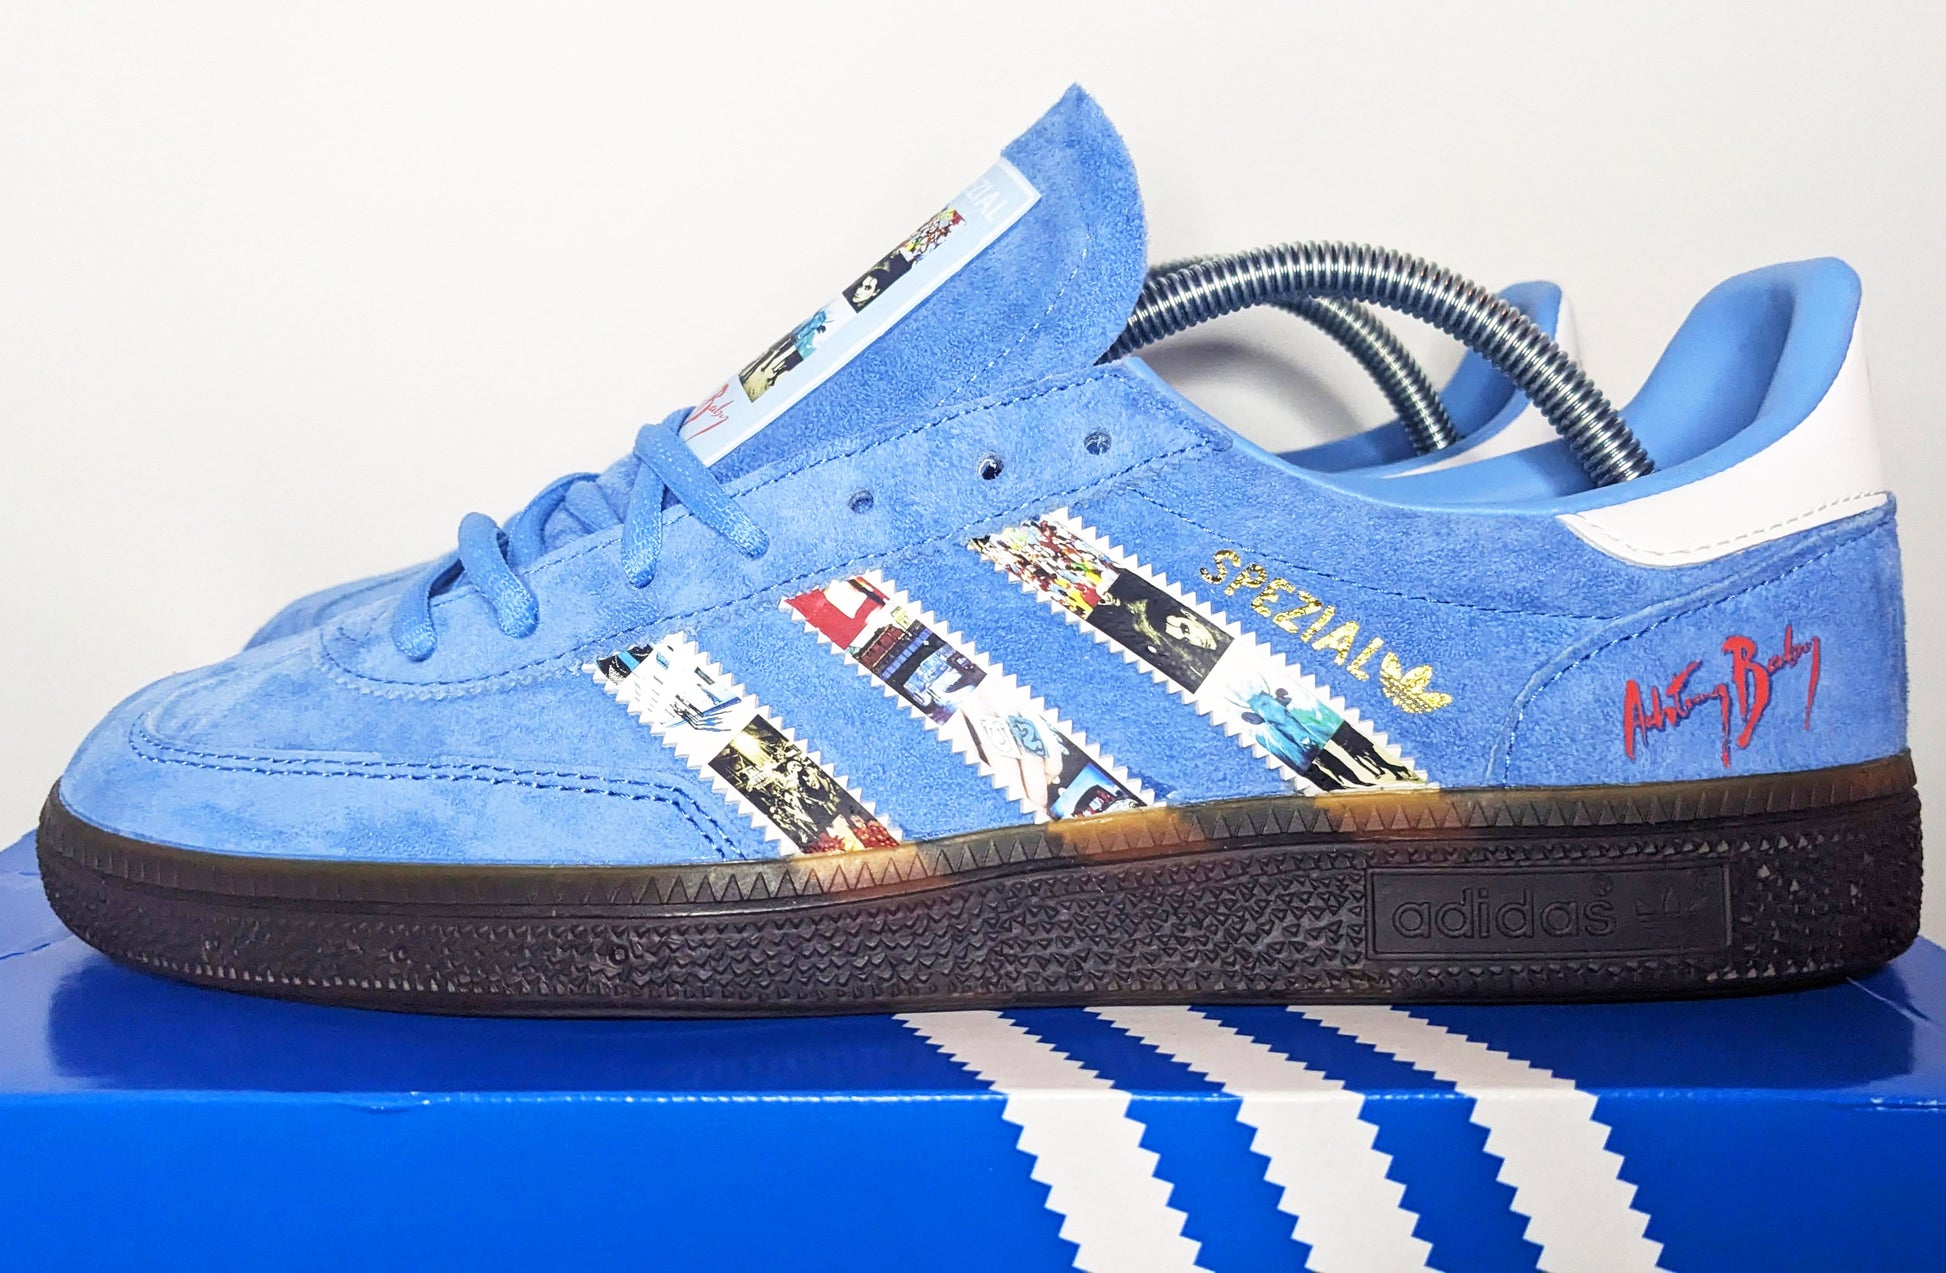 Limited edition U2 Achtung Baby Sky blue / white Adidas custom Sneakcustomtrainers.com